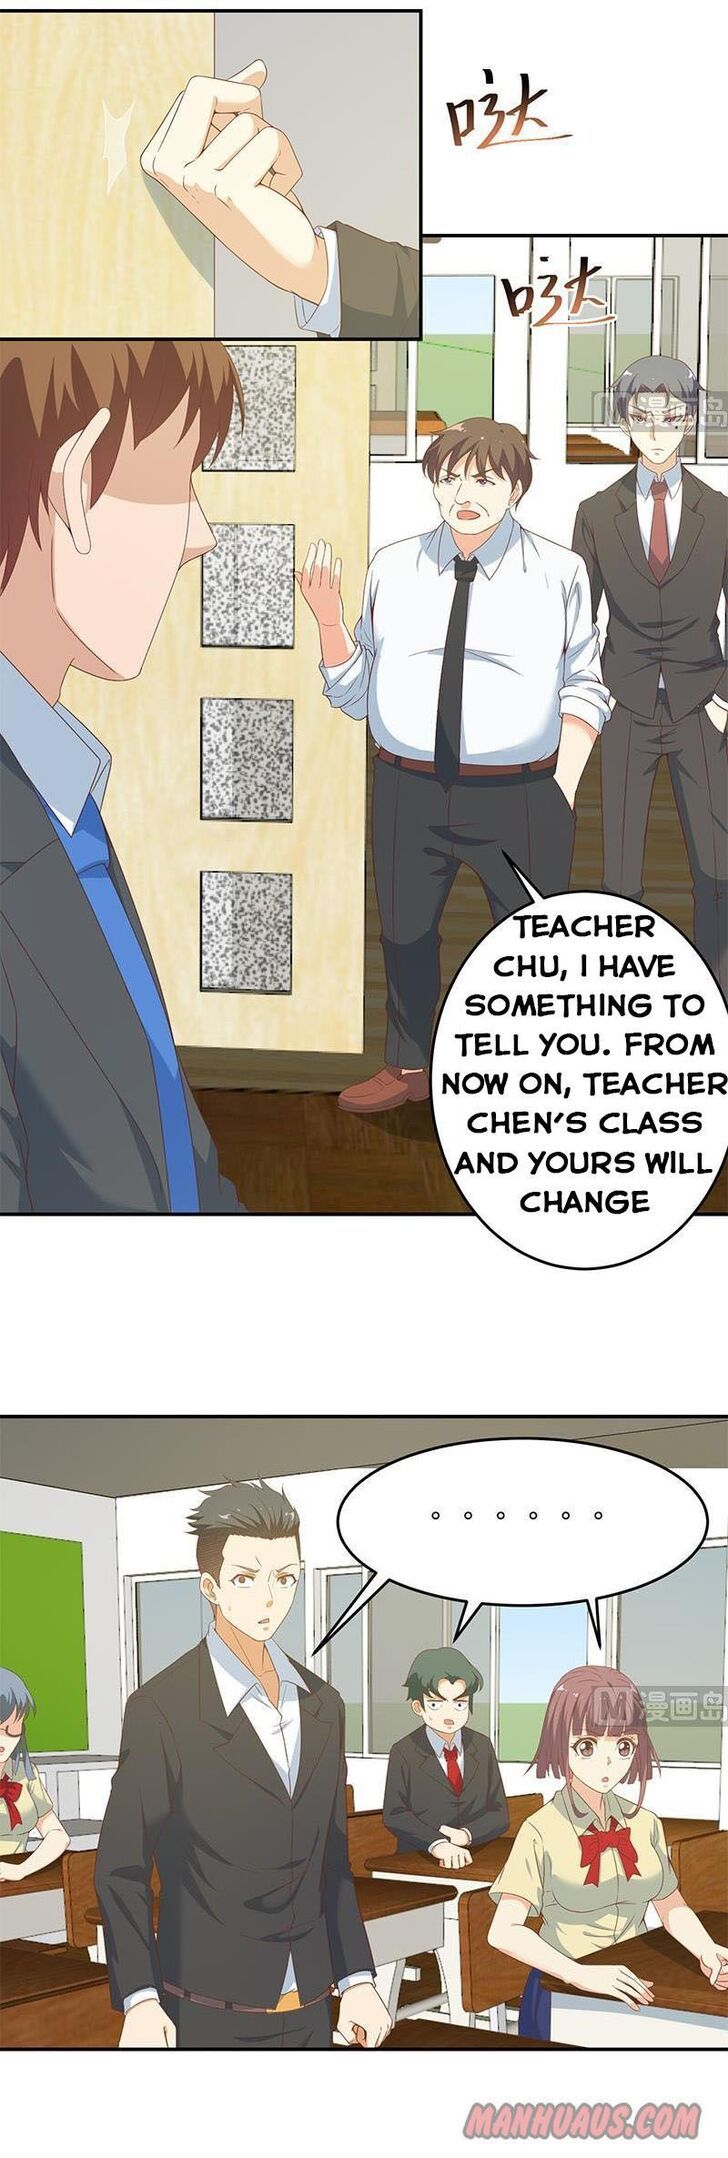 Cultivation Return on Campus Chapter 016 page 6